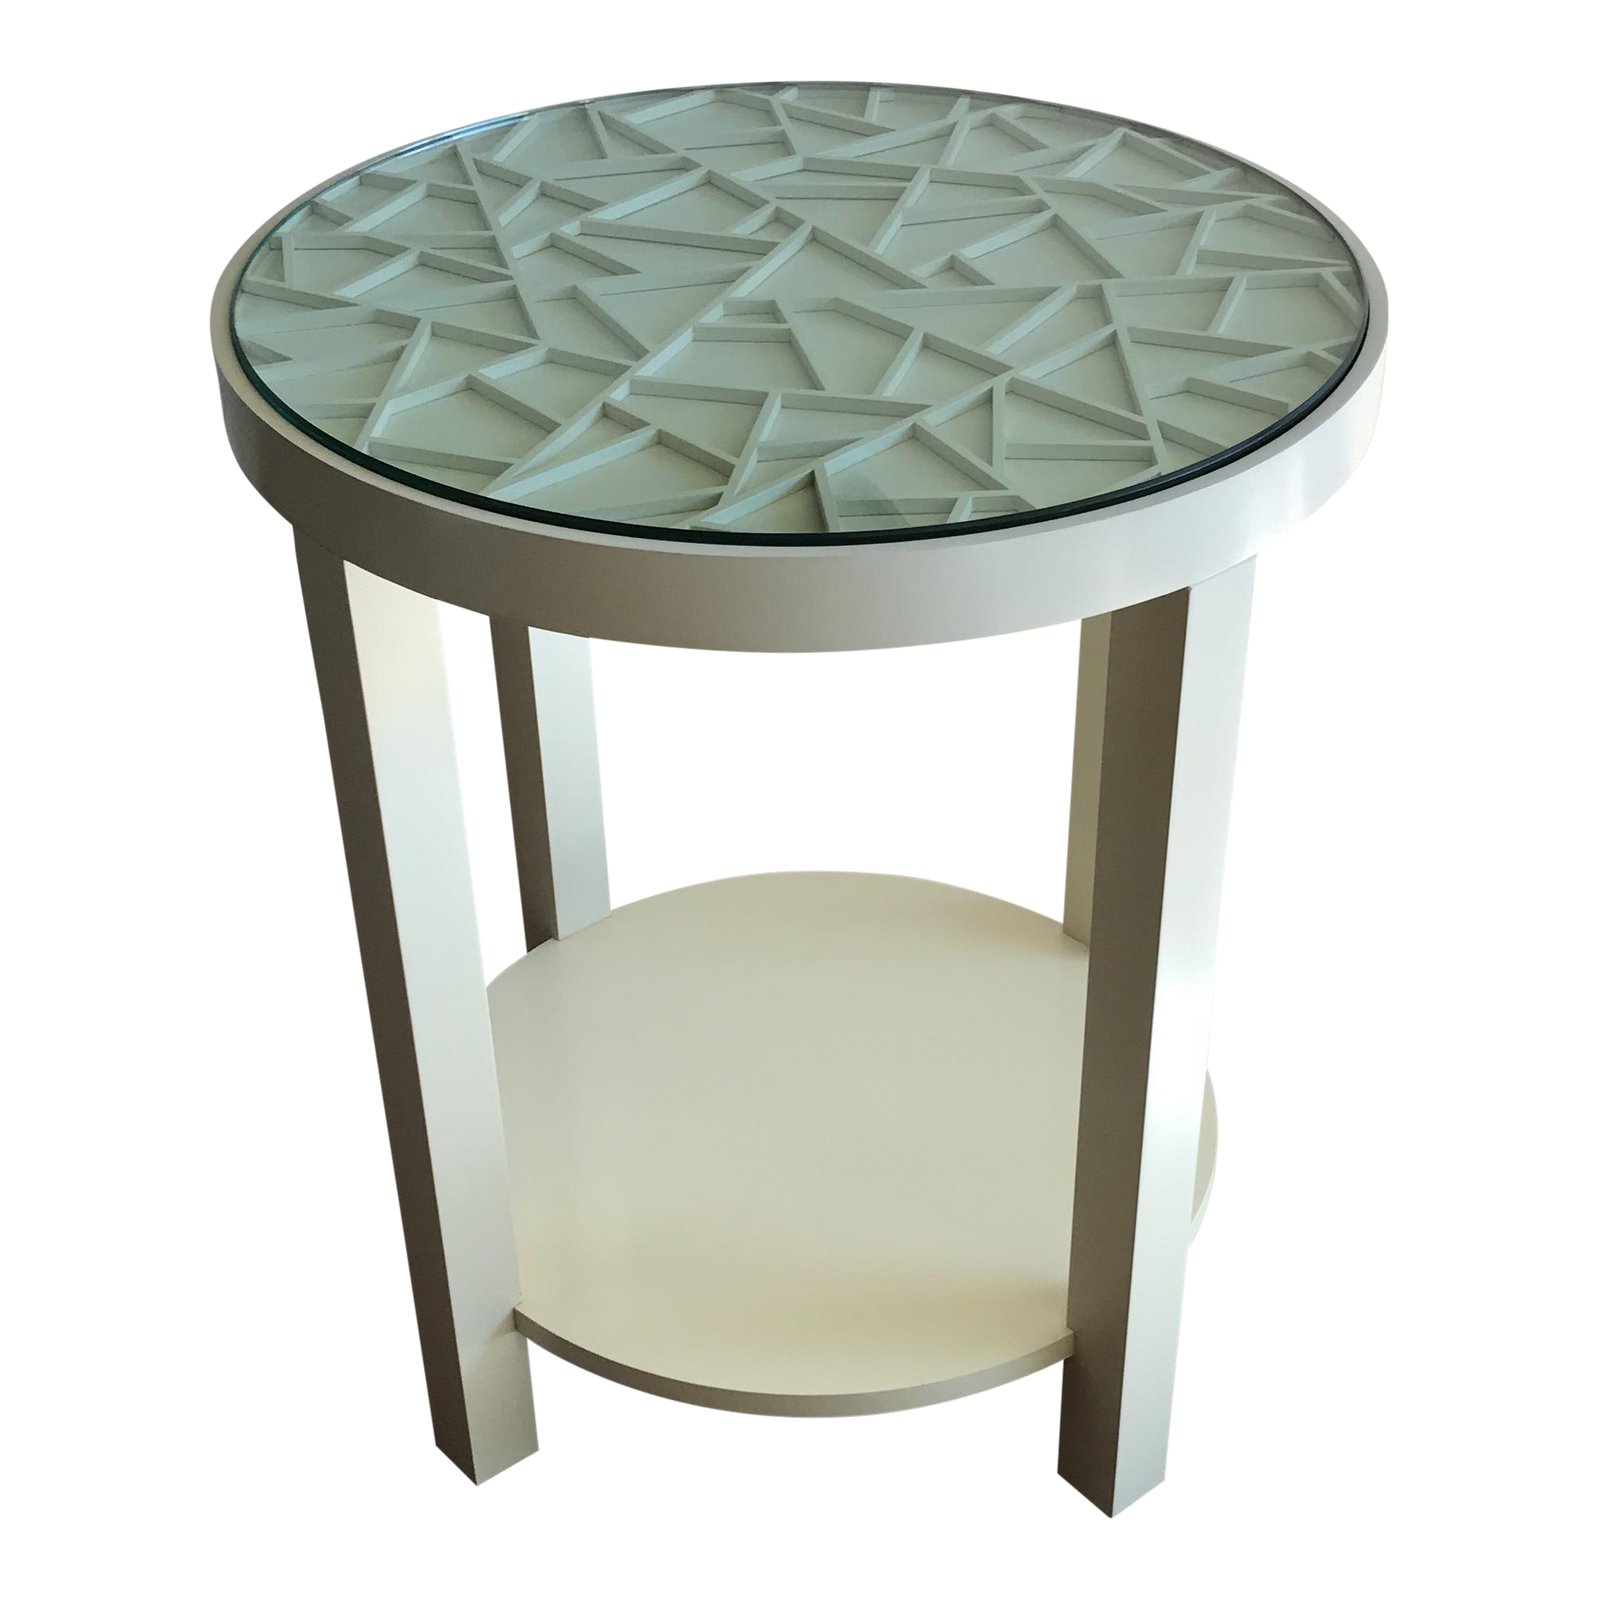 baker furniture round off white with glass top accent table chairish and chairs for small spaces gray inch nightstand dale tiffany amber mosaic lamp wood iron coffee french